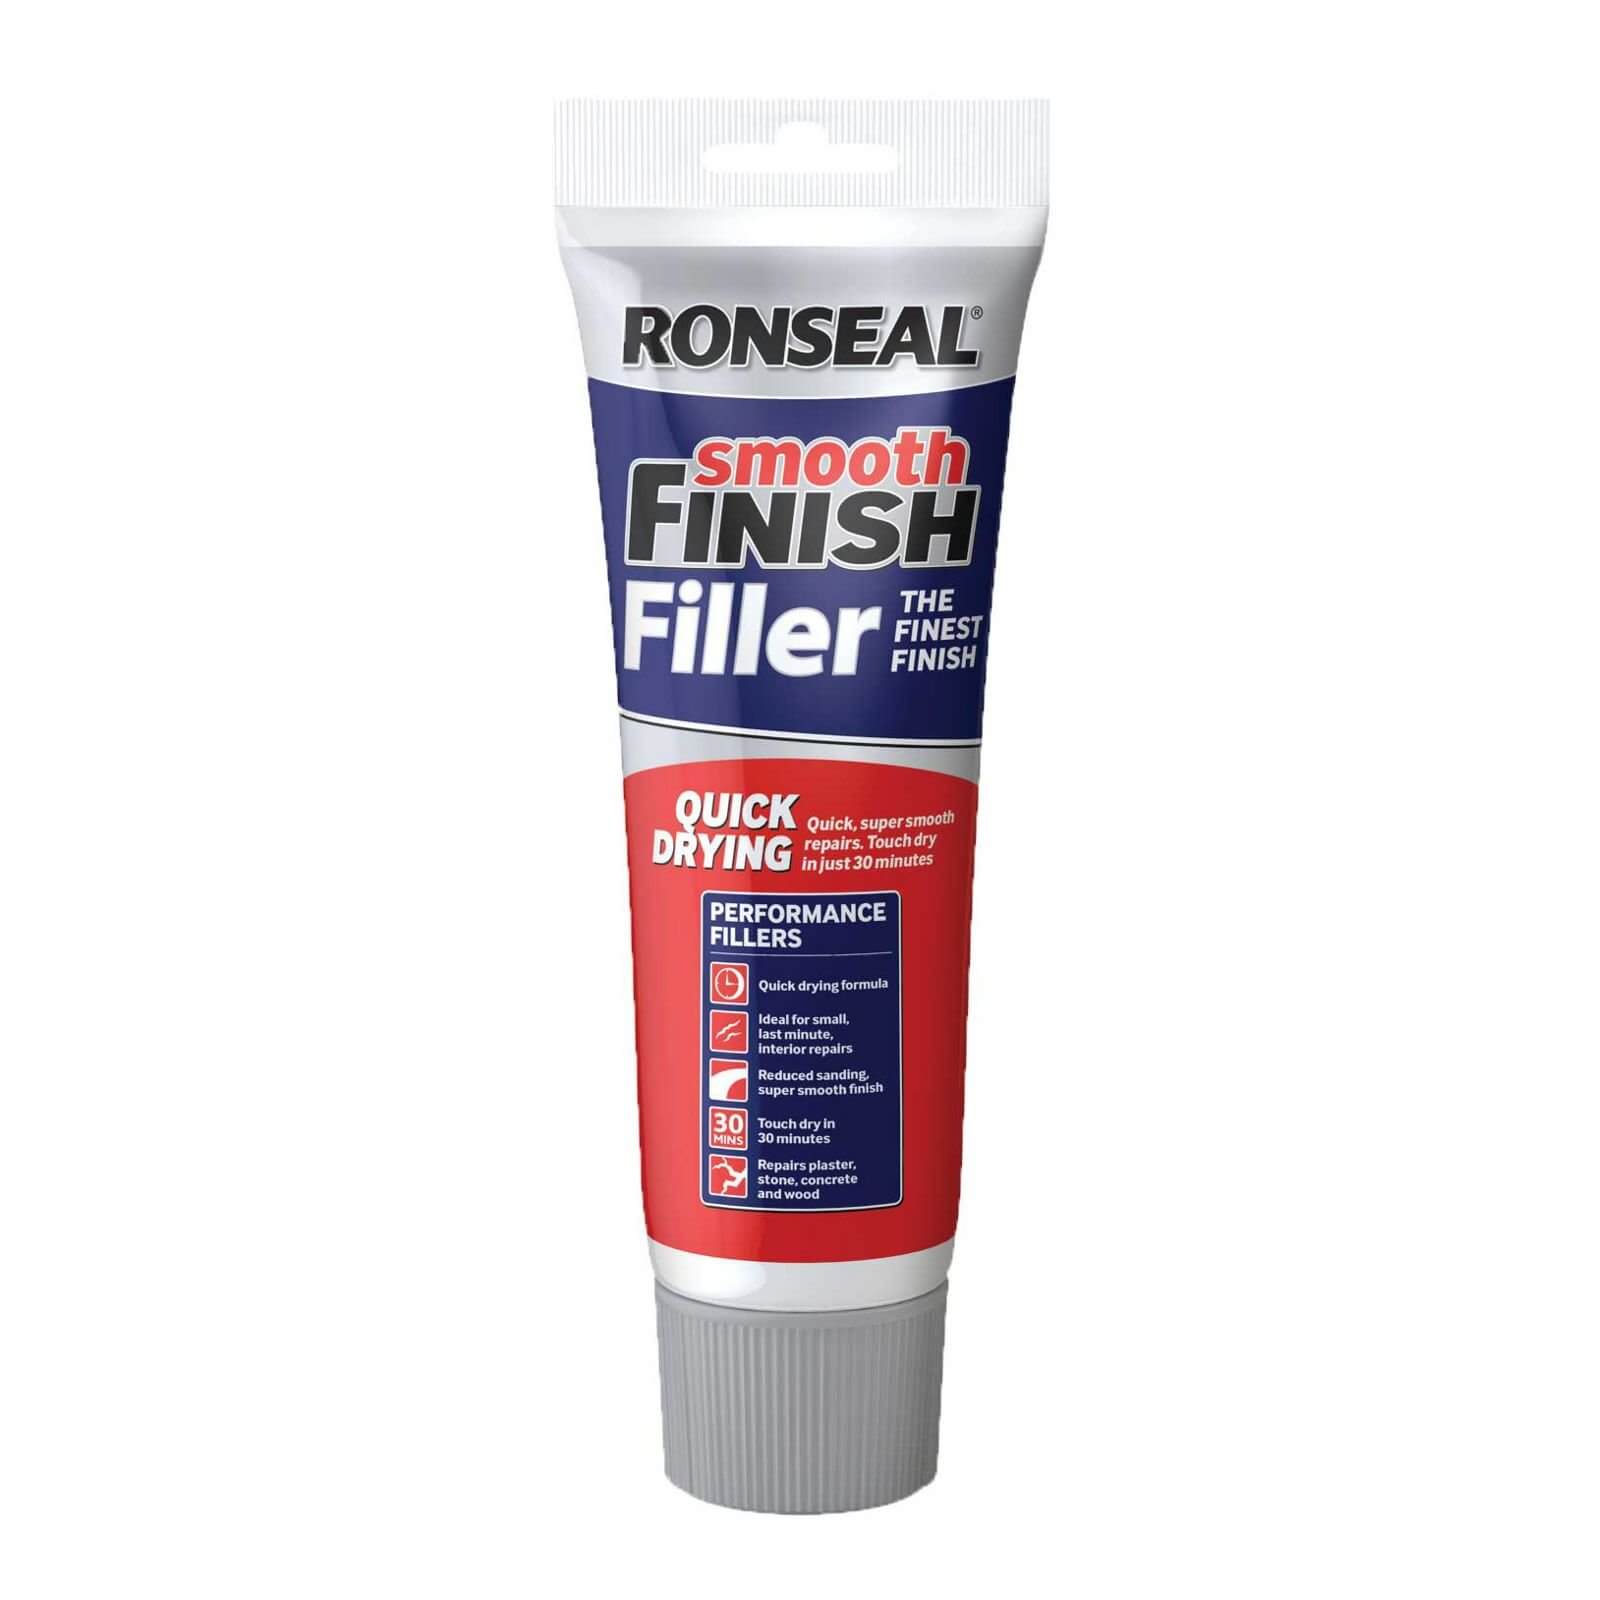 Ronseal Quick Drying Wall Filler - 330g